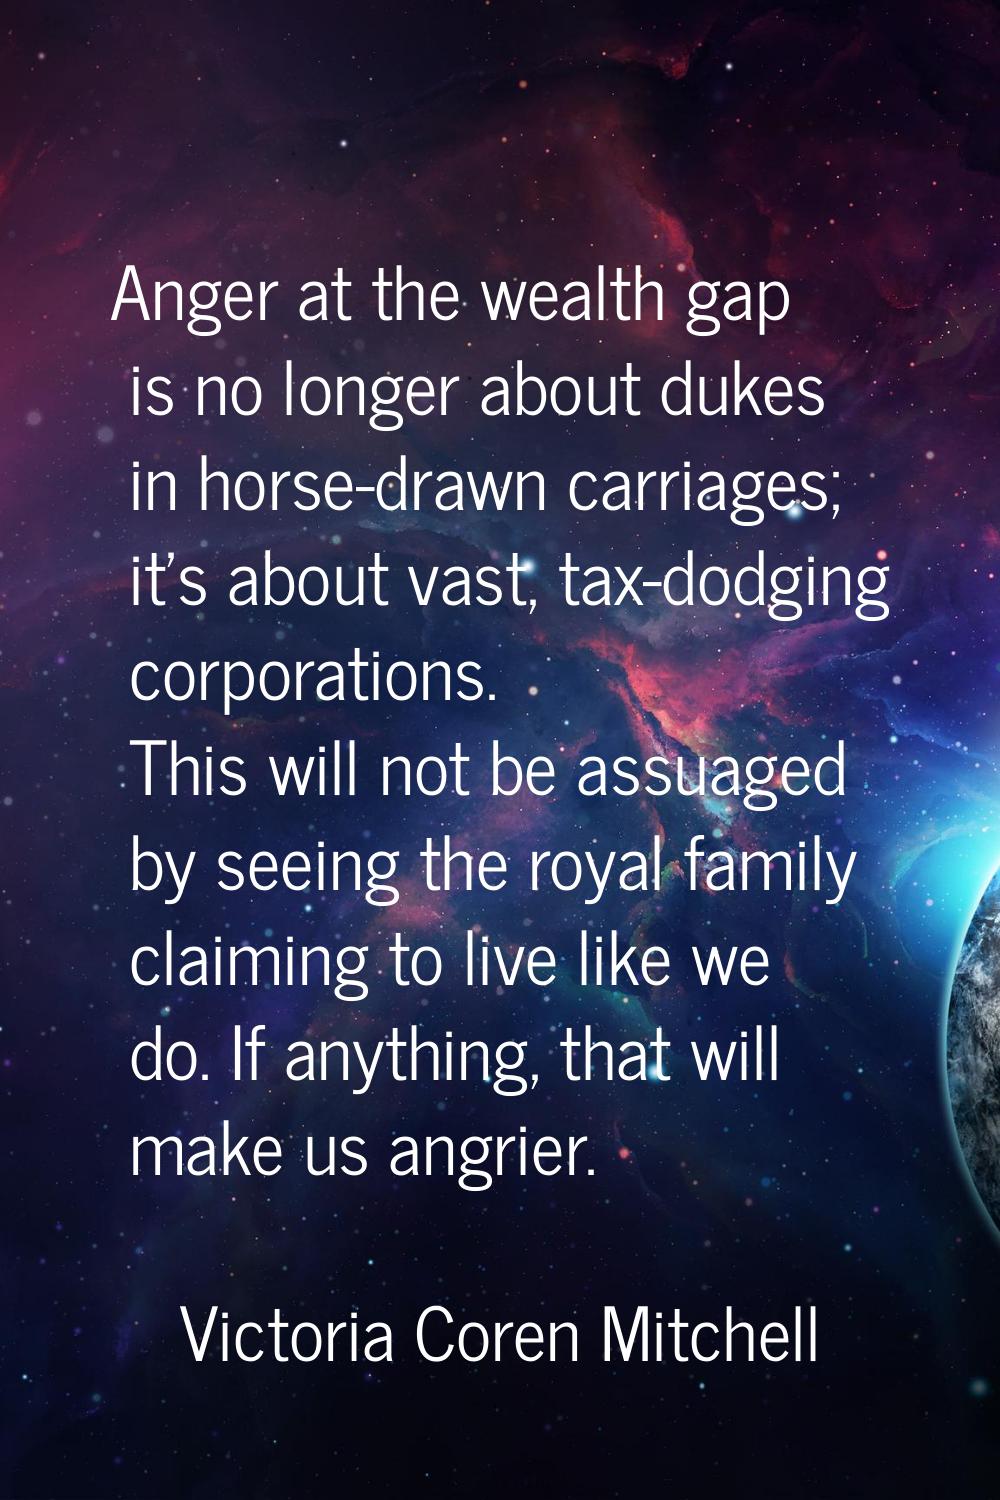 Anger at the wealth gap is no longer about dukes in horse-drawn carriages; it's about vast, tax-dod